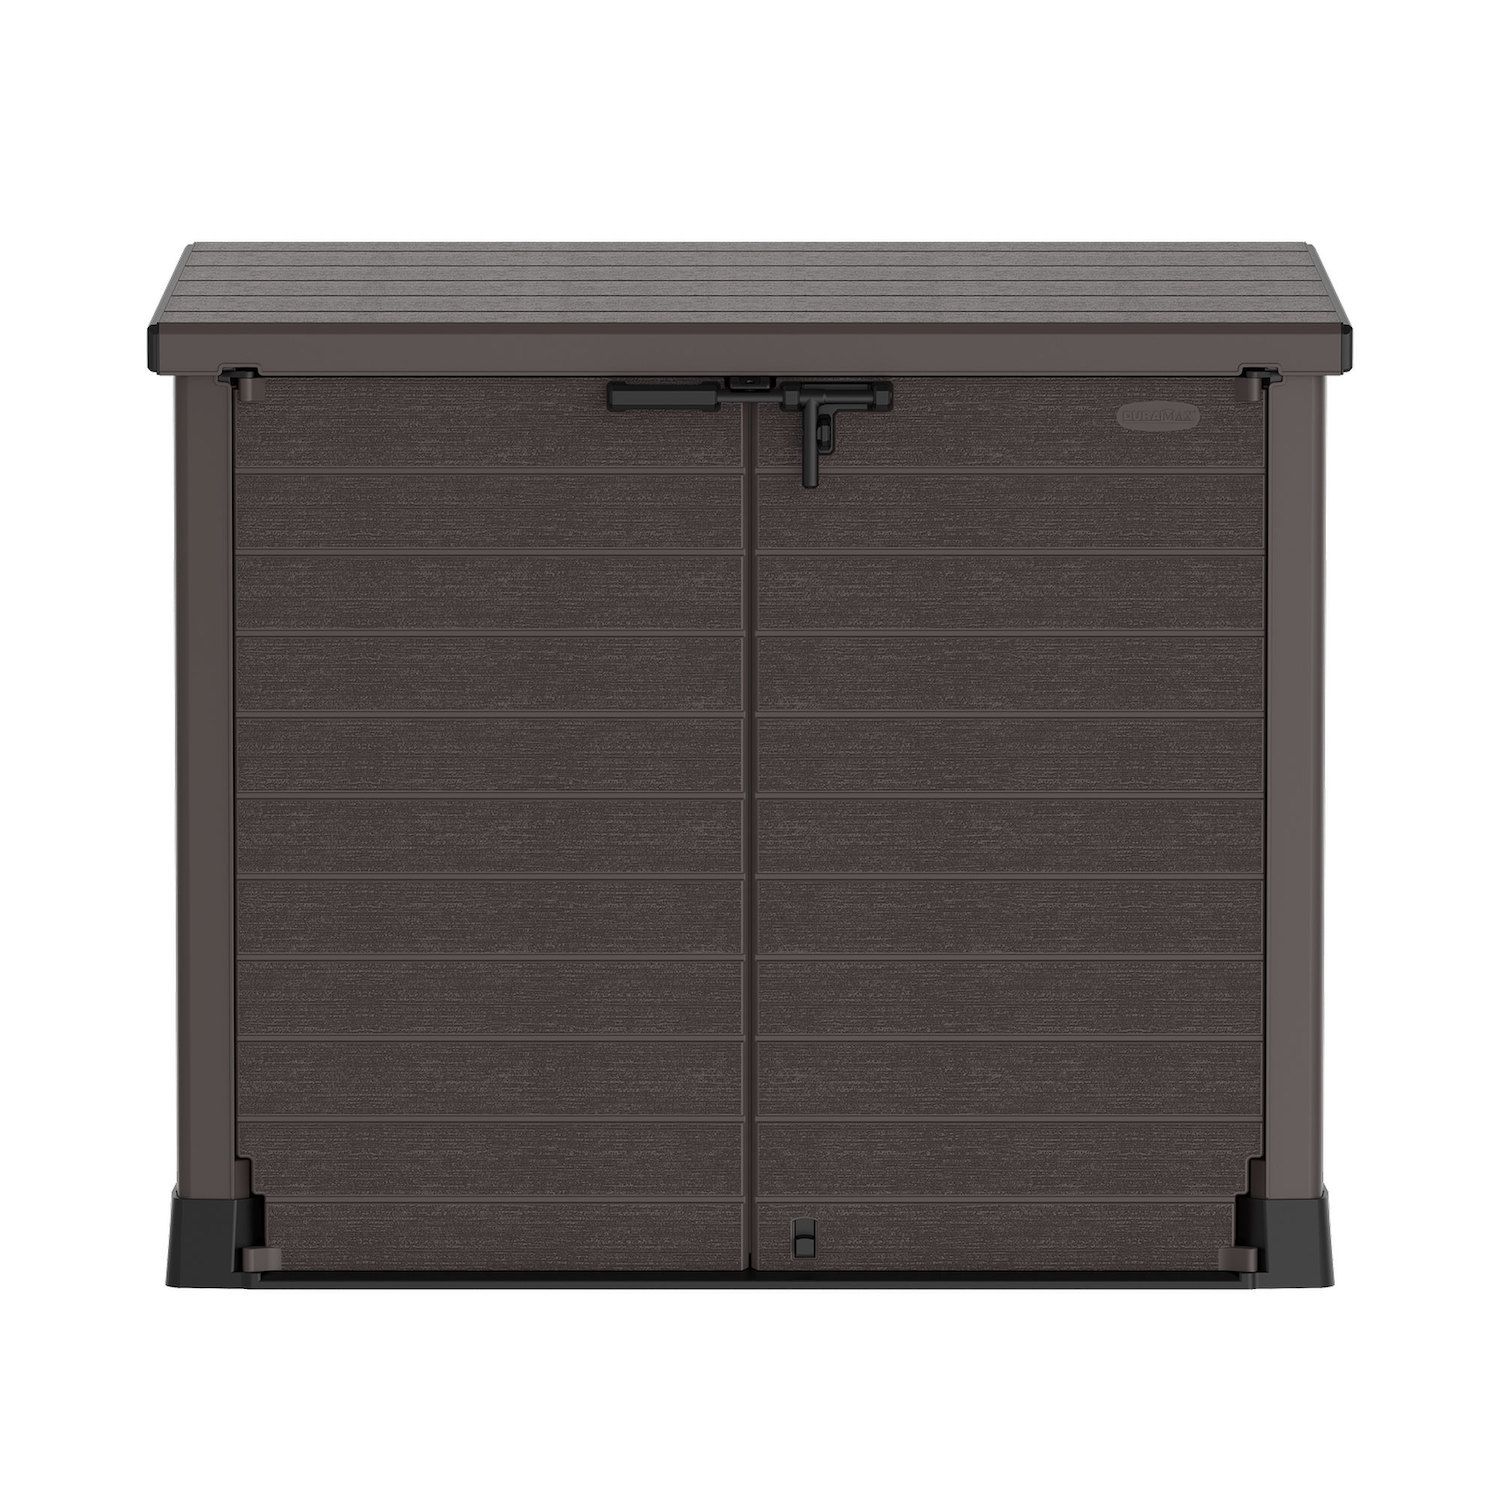 New and used Outdoor Storage Boxes for sale